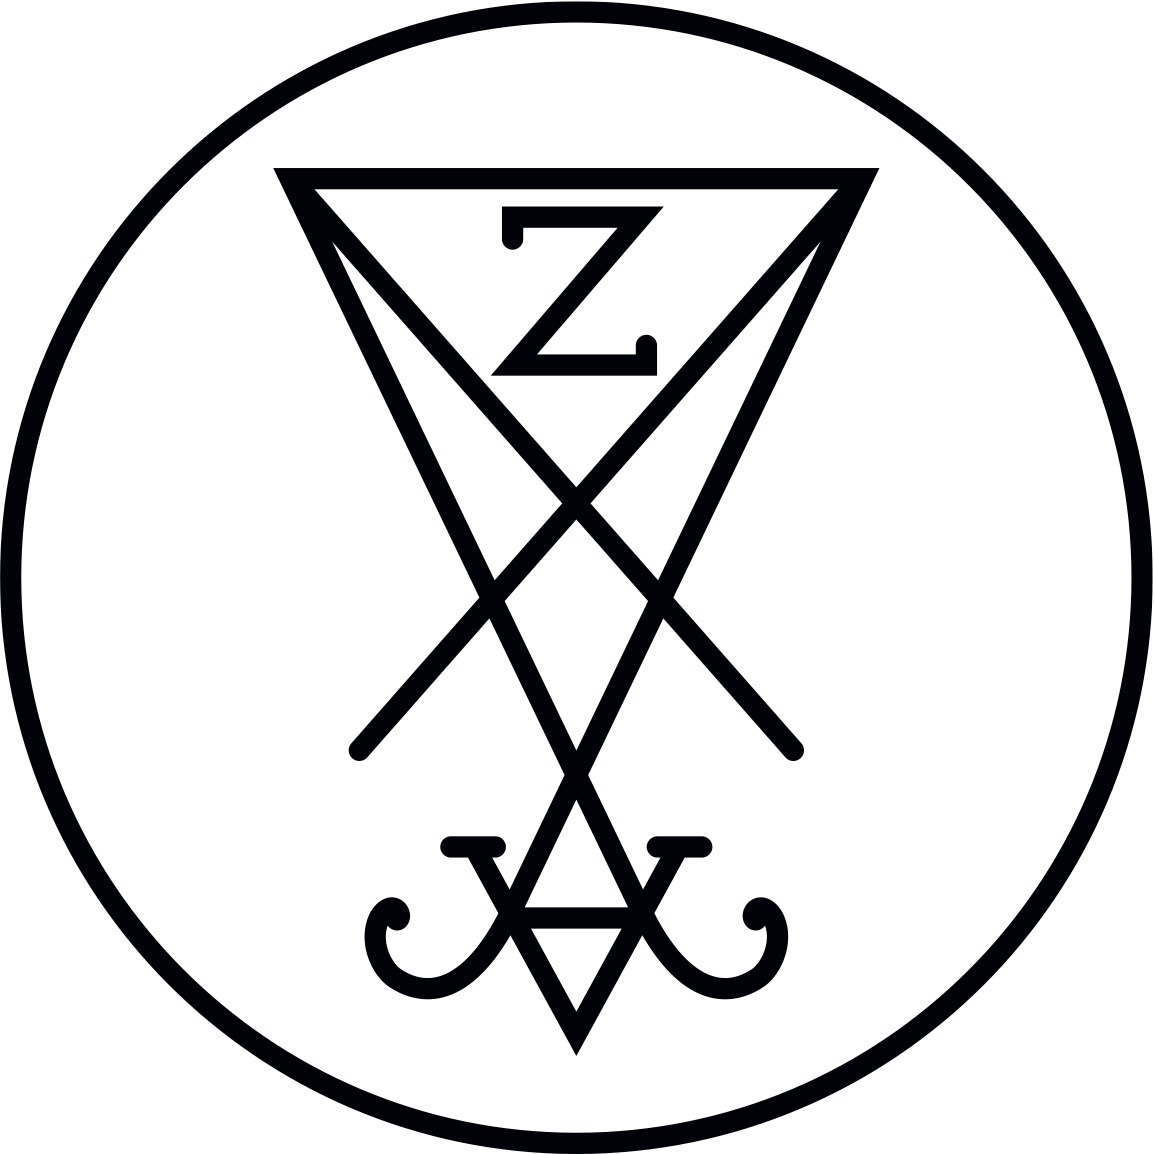 Zeal & Ardor Share New Song "Built on Ashes," Featured in The Guardian